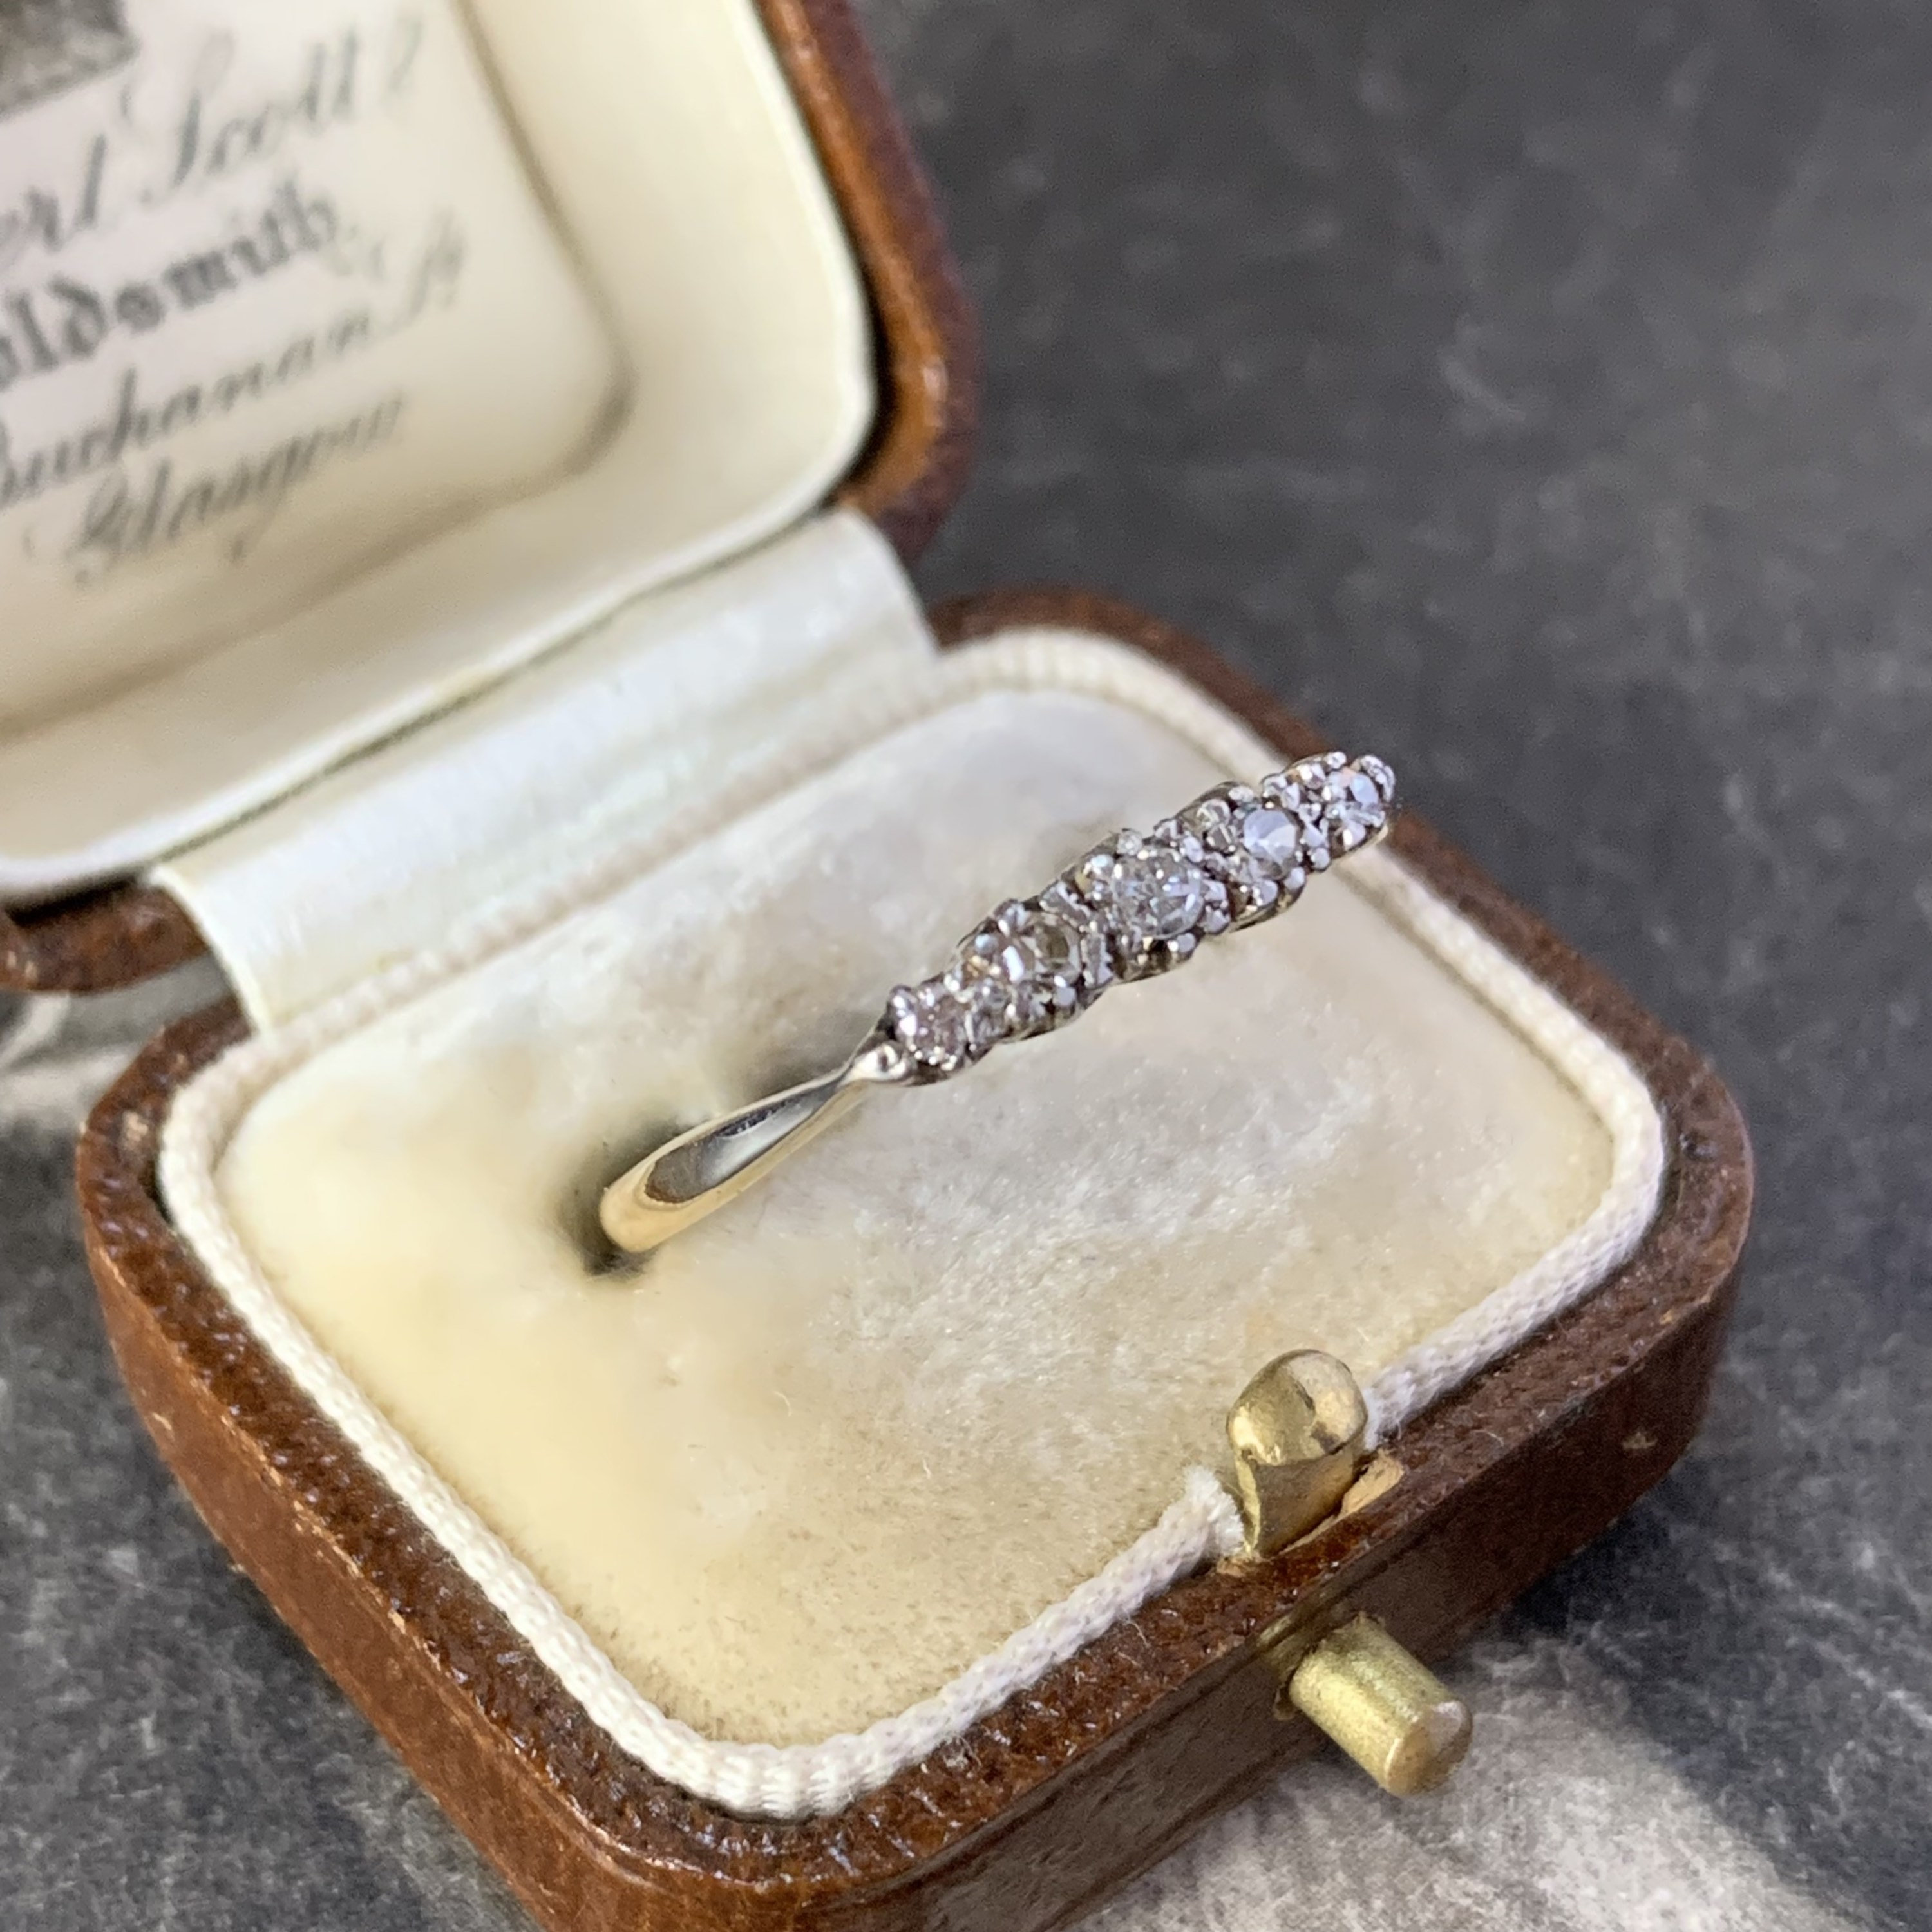 Art Deco 5 Stone Diamond Eternity Ring. Size R & Made From Gold Platinum With Antique English Hallmark. 8 5/8 Us